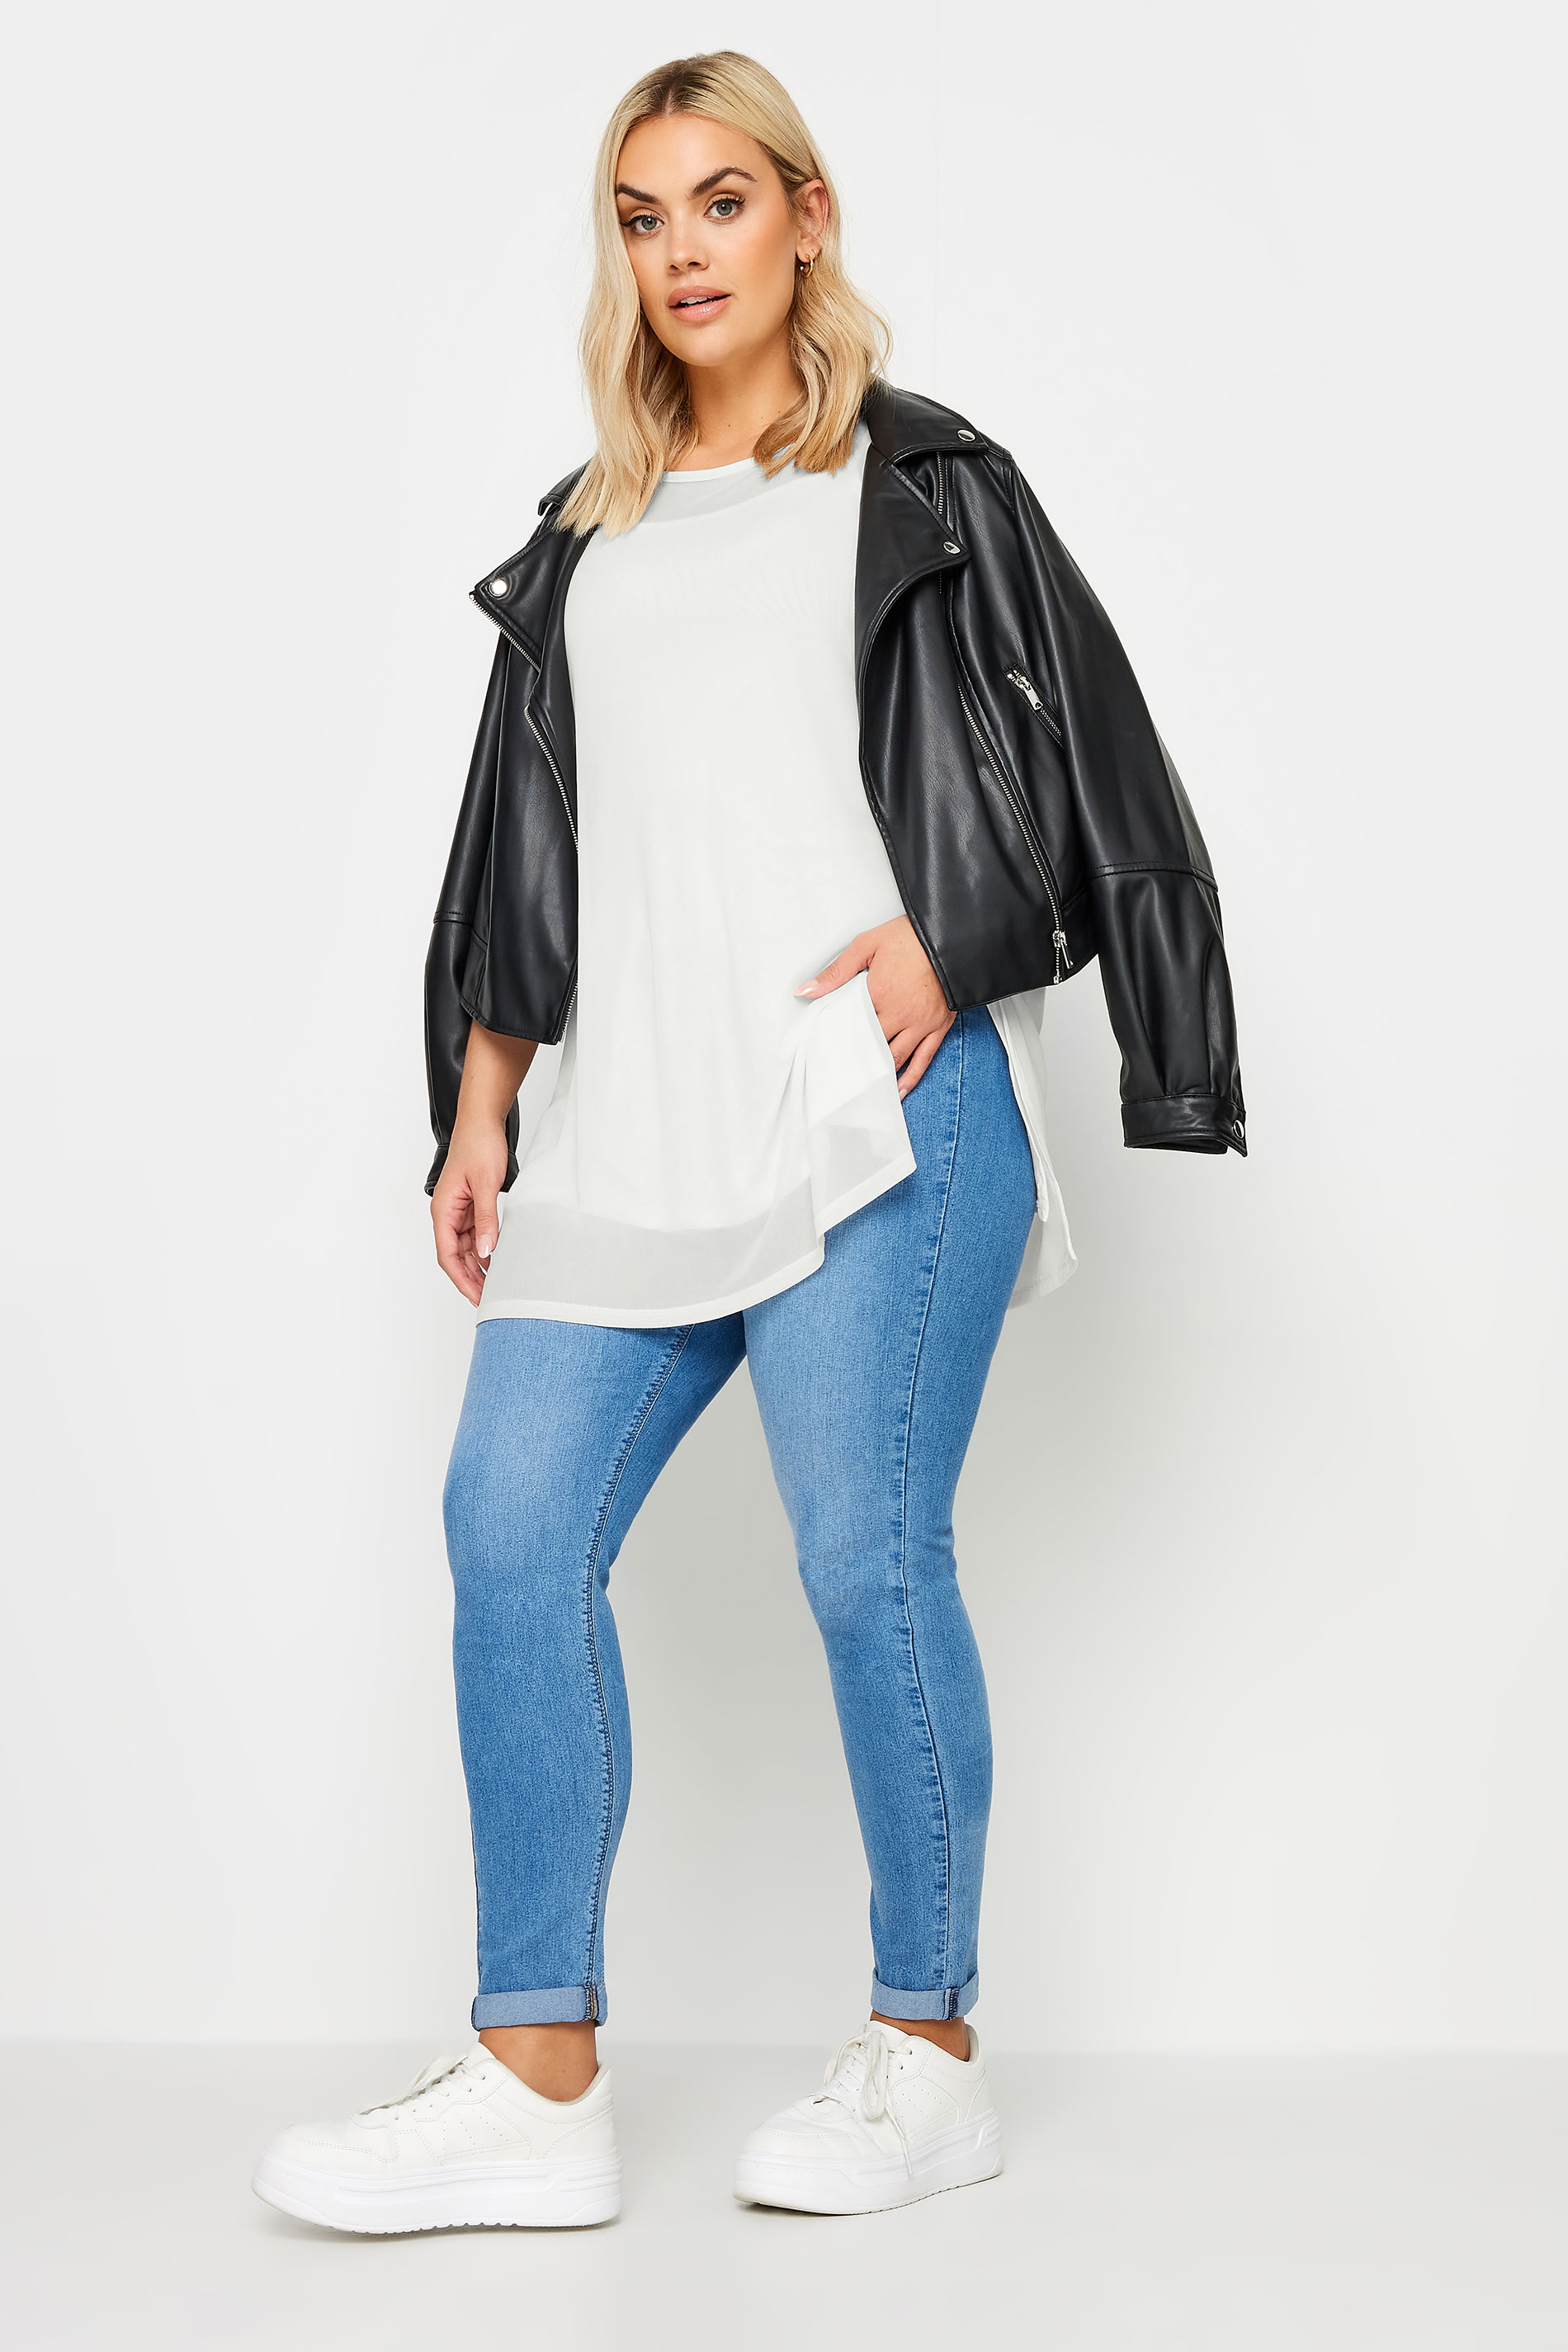 YOURS Plus Size White Oversized Mesh Top | Yours Clothing 2